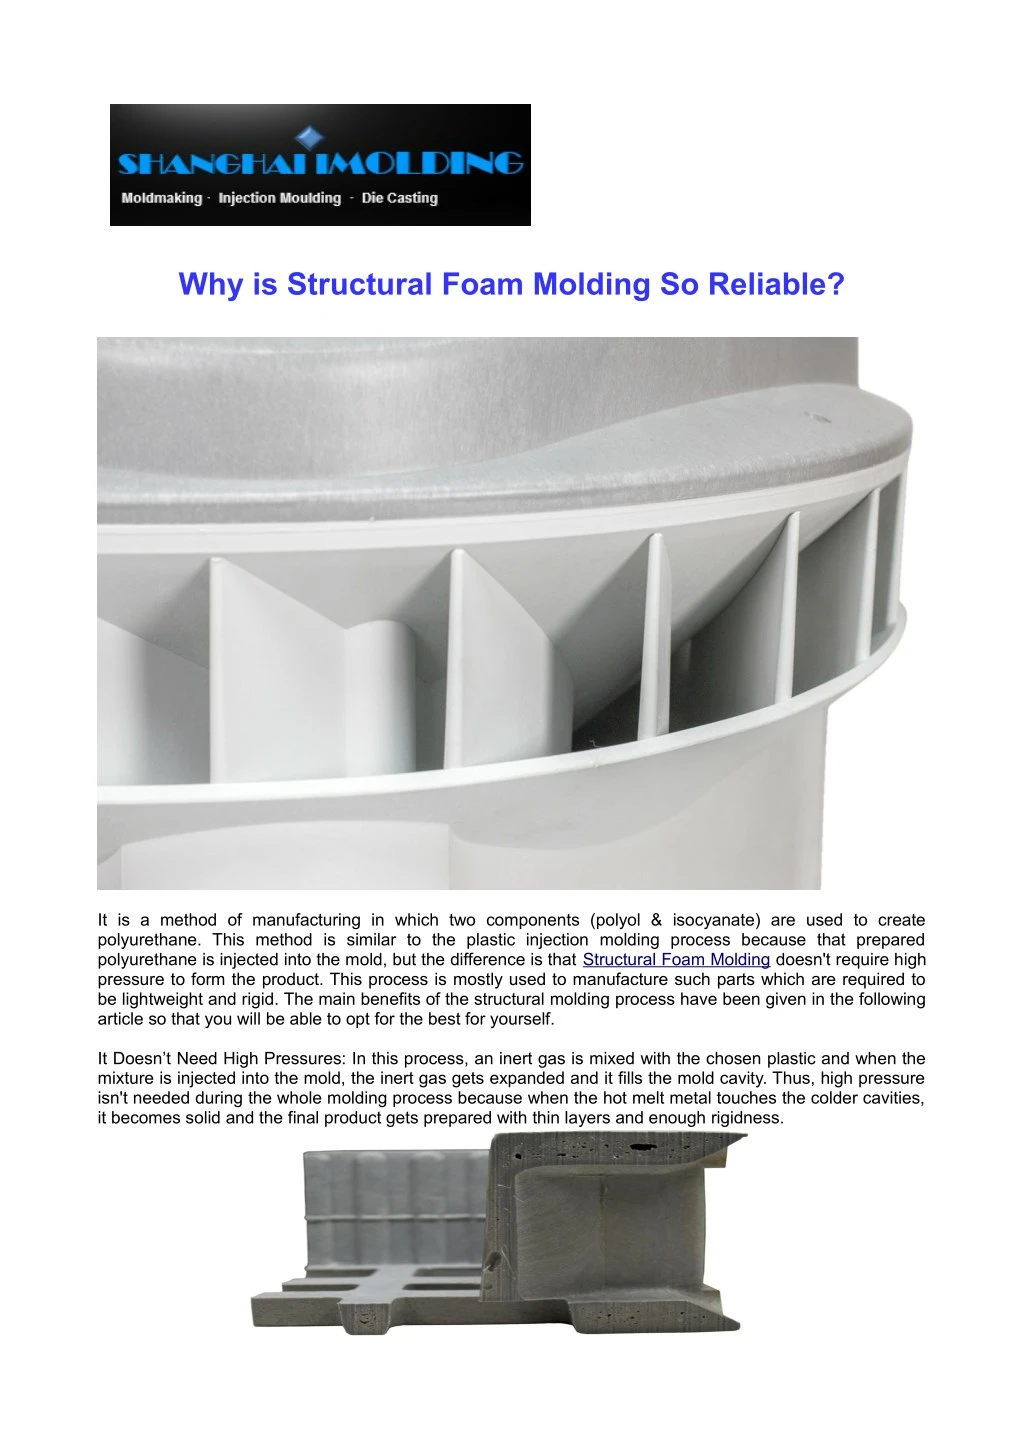 why is structural foam molding so reliable